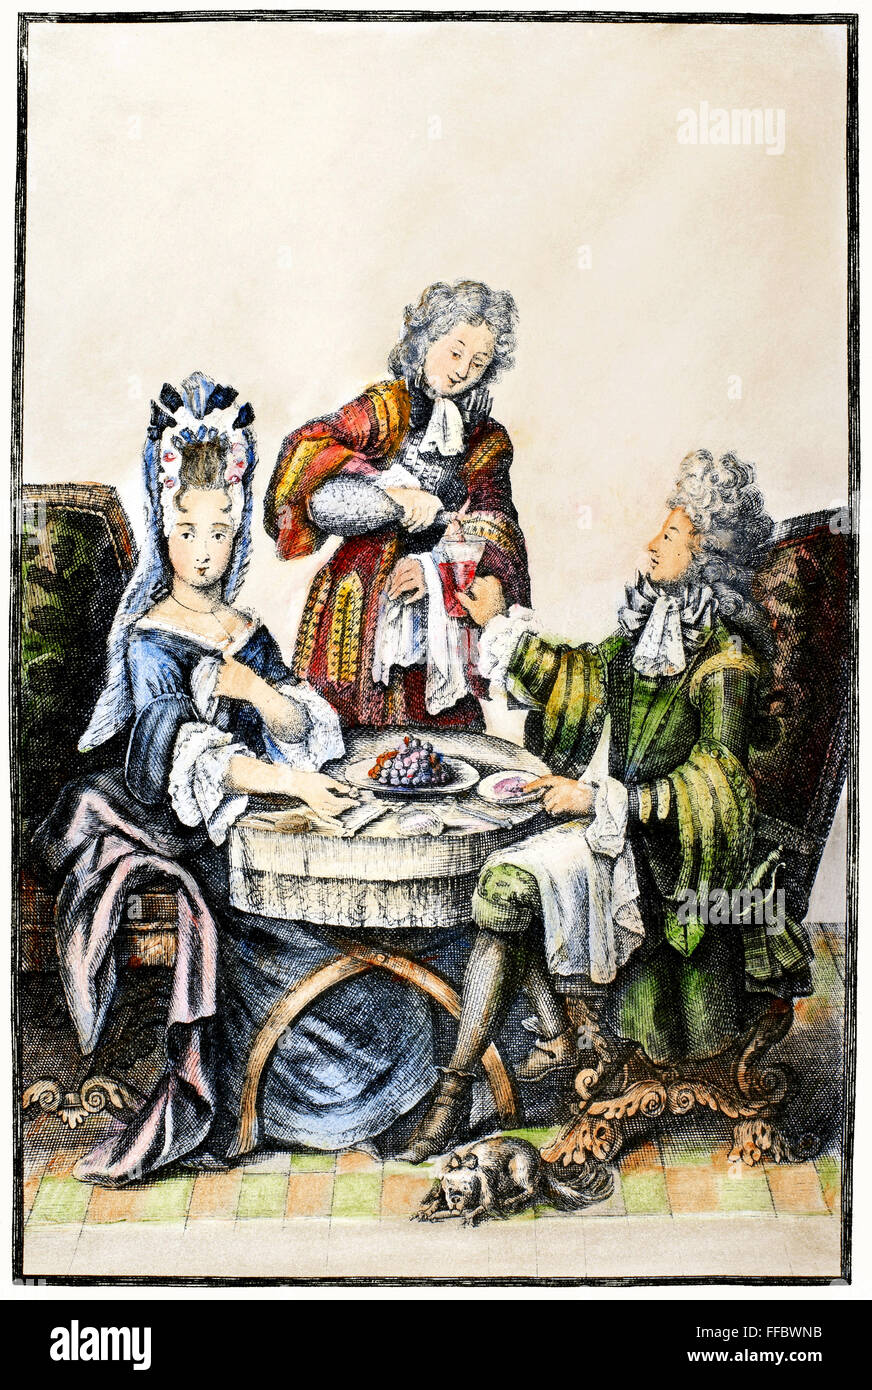 DRINKING, 17th CENTURY. /n'The Sense of Taste.' Copper engraving, French, late 17th century. Stock Photo